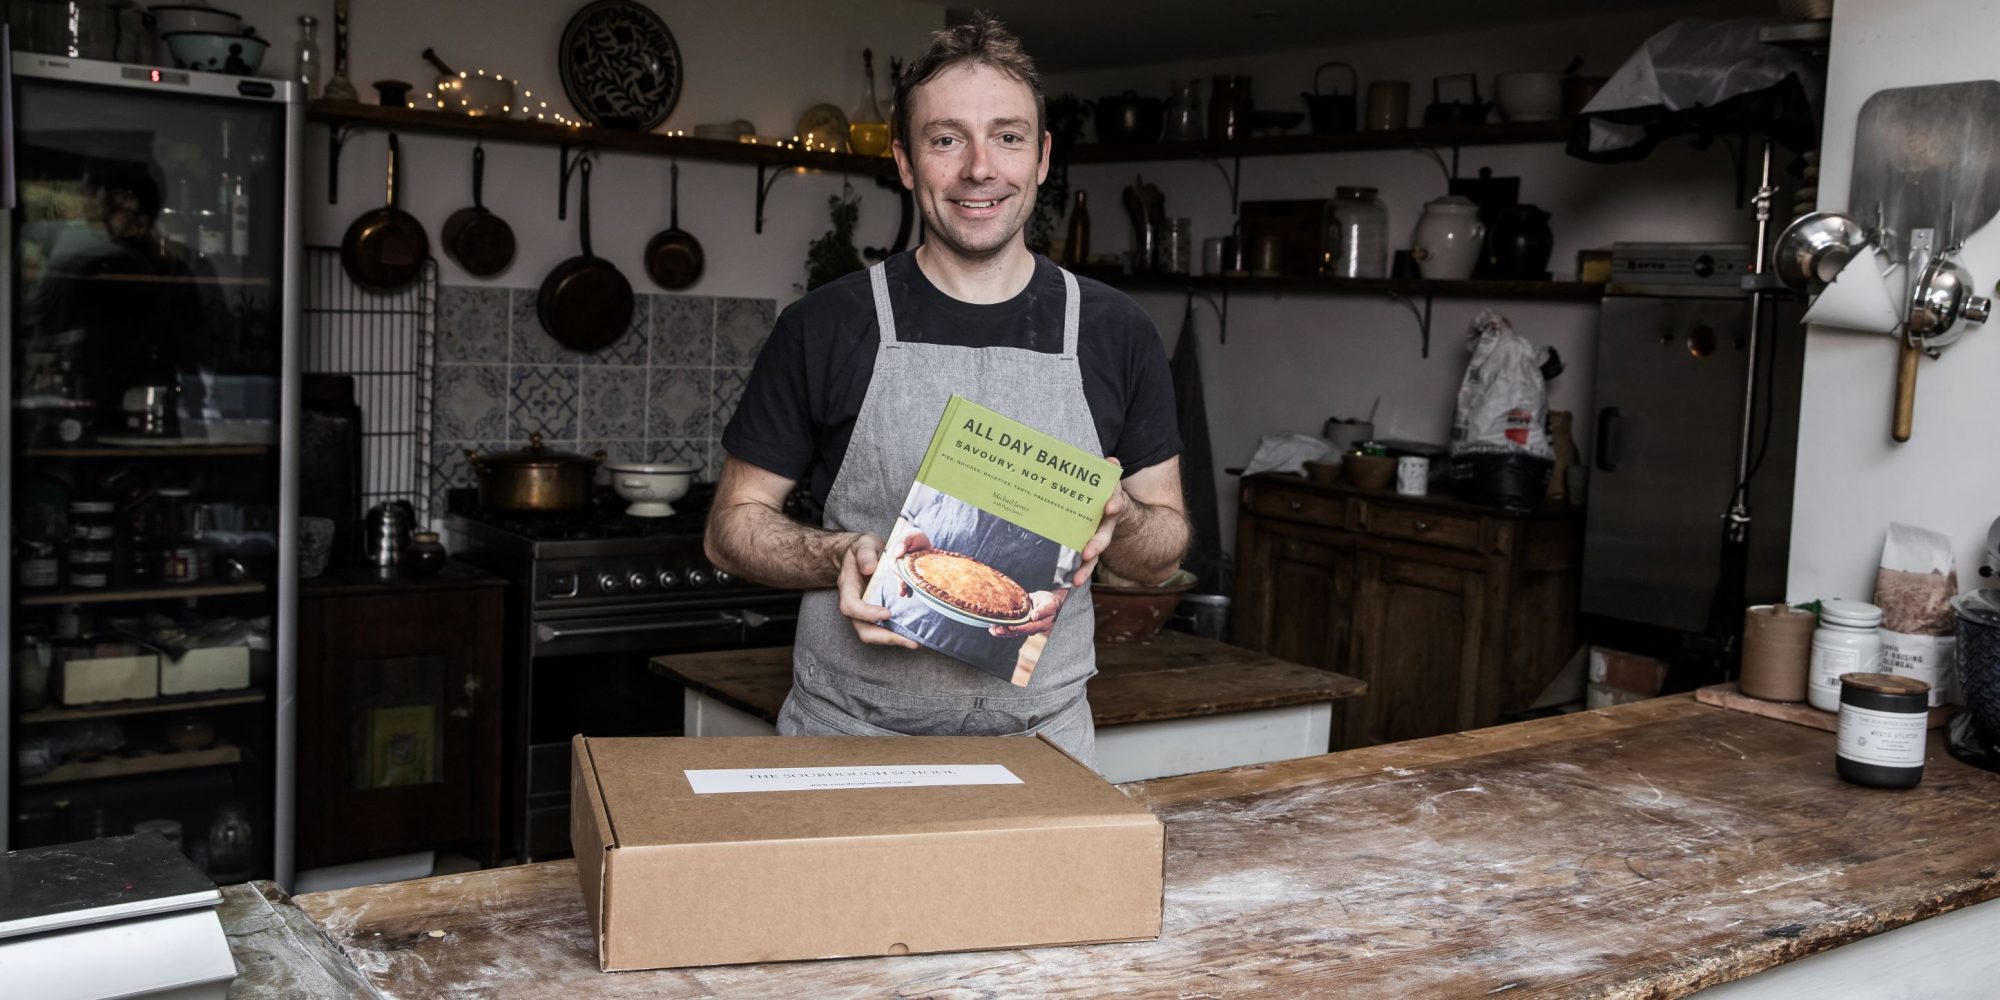 Michael James All Day Baking Savoury Not Sweet book